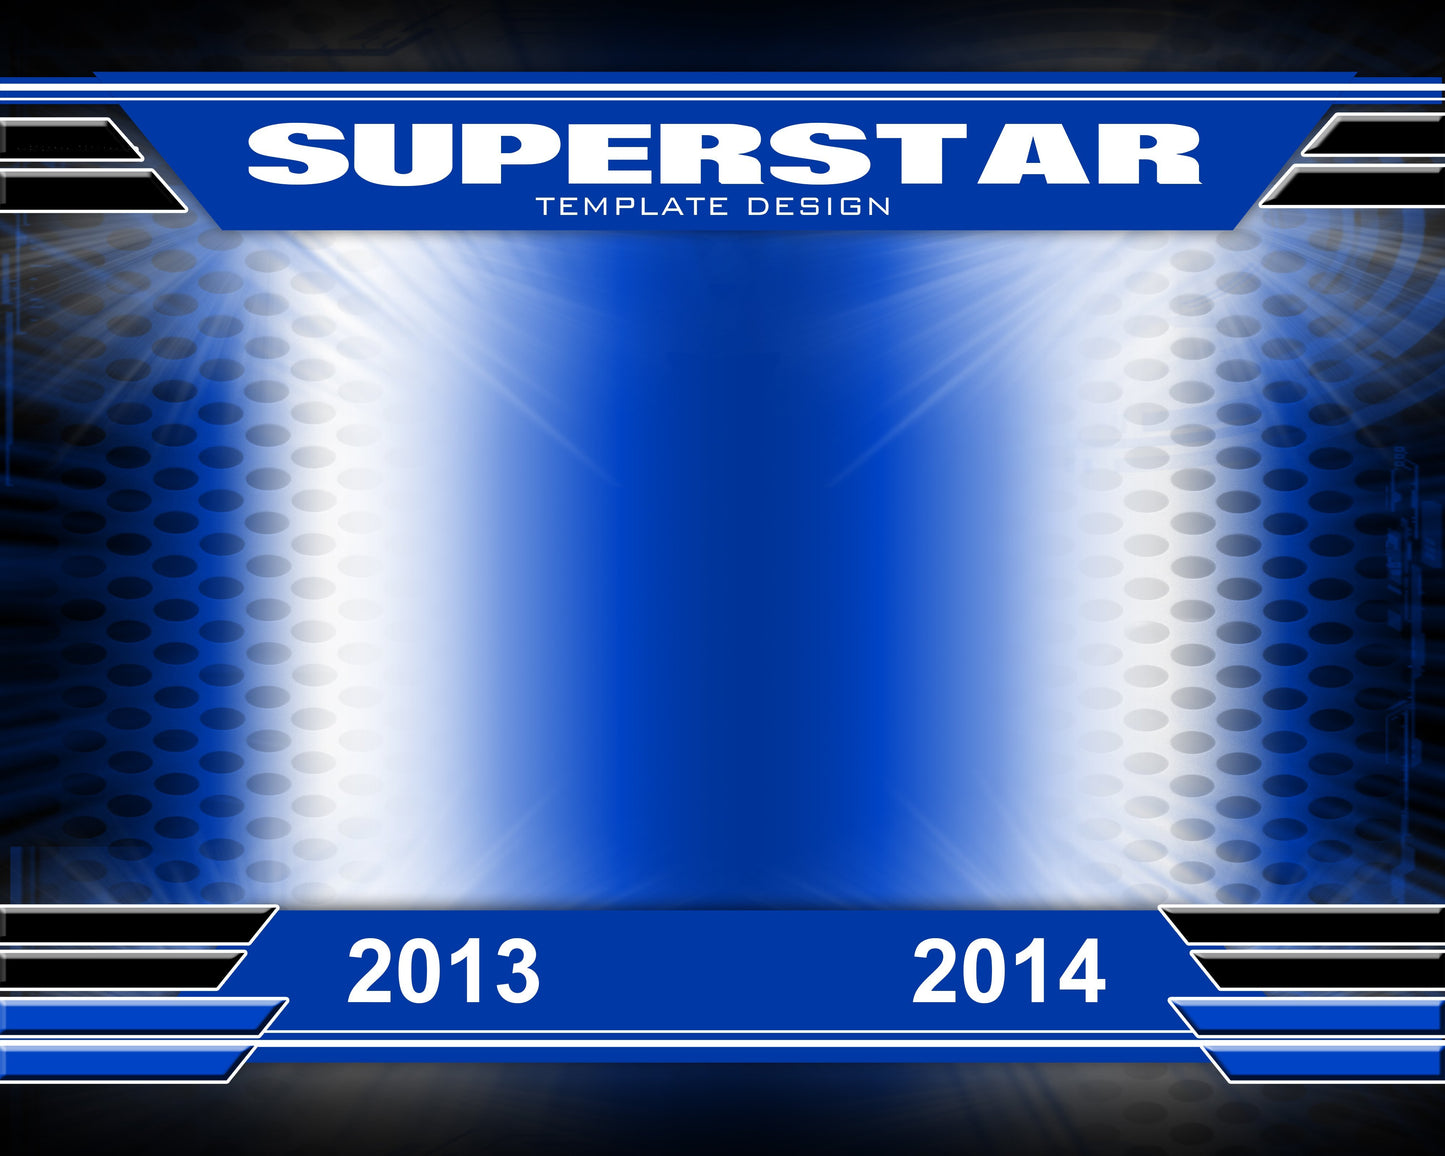 Superstar v.1 - Xtreme Team-Photoshop Template - Photo Solutions